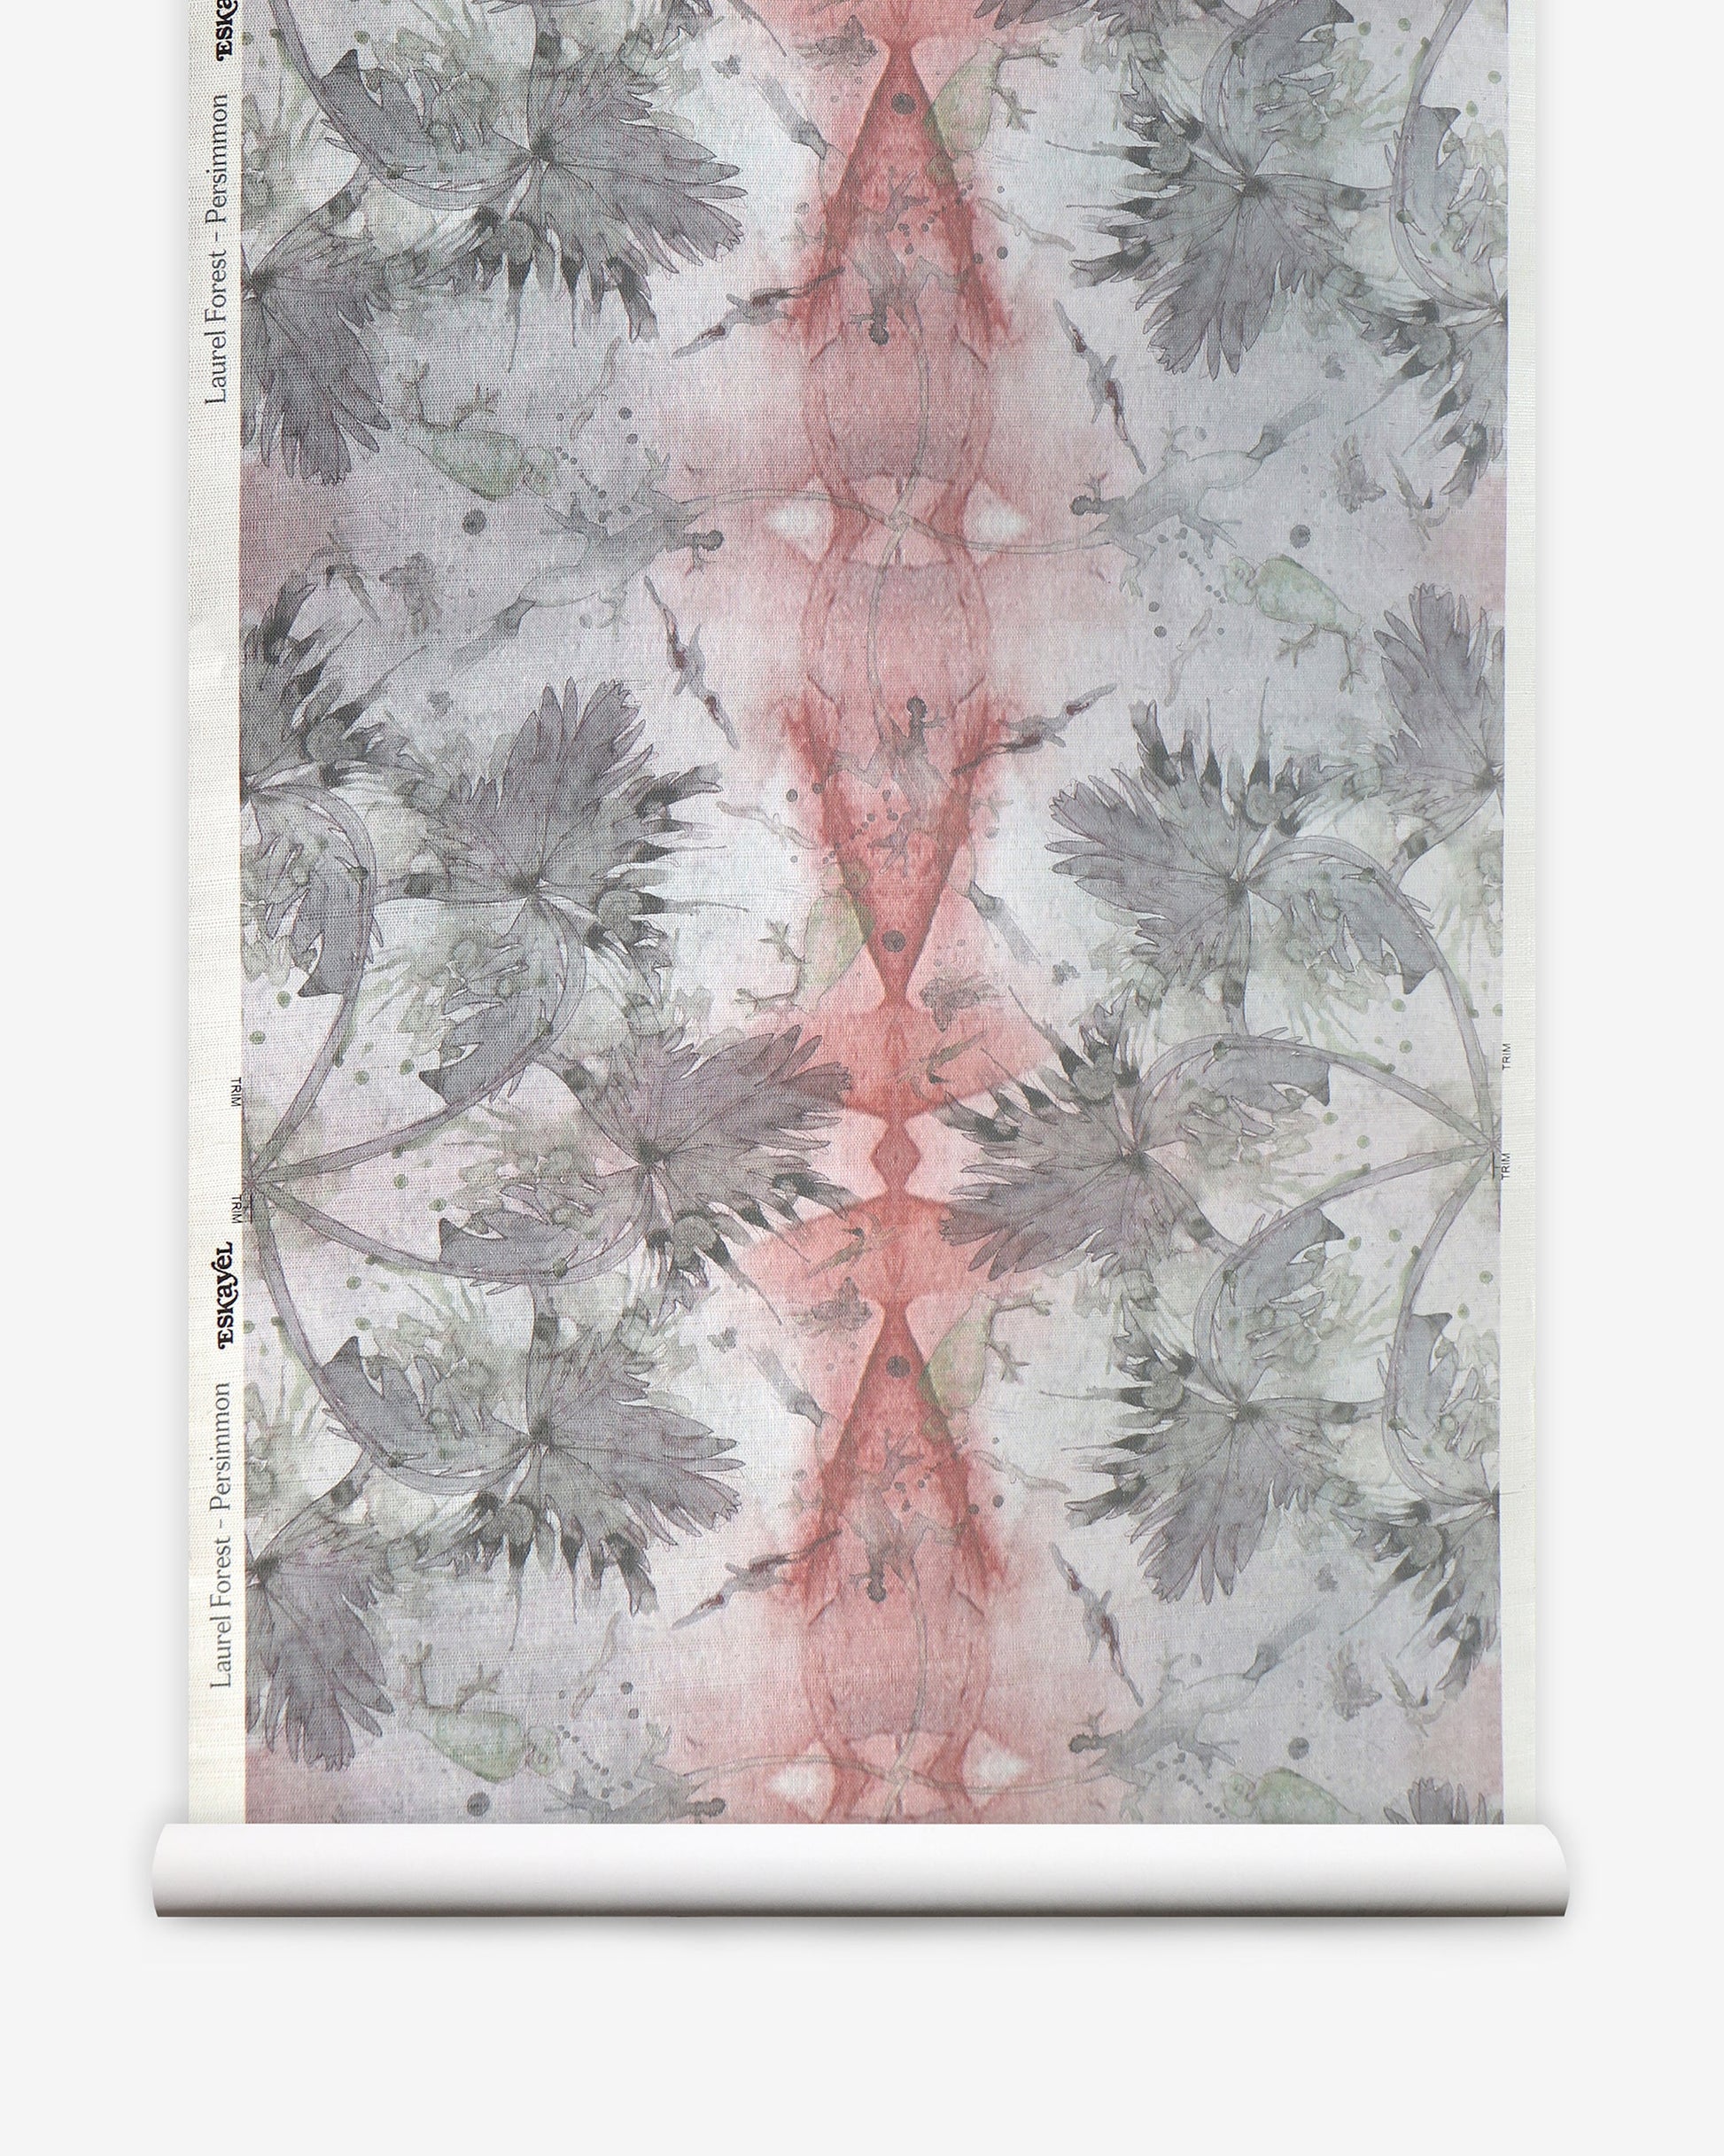 A pink and grey floral wallpaper on a roll named "Laurel Forest Grasscloth Persimmon" with watercolor brushstrokes creating a tropical atmosphere